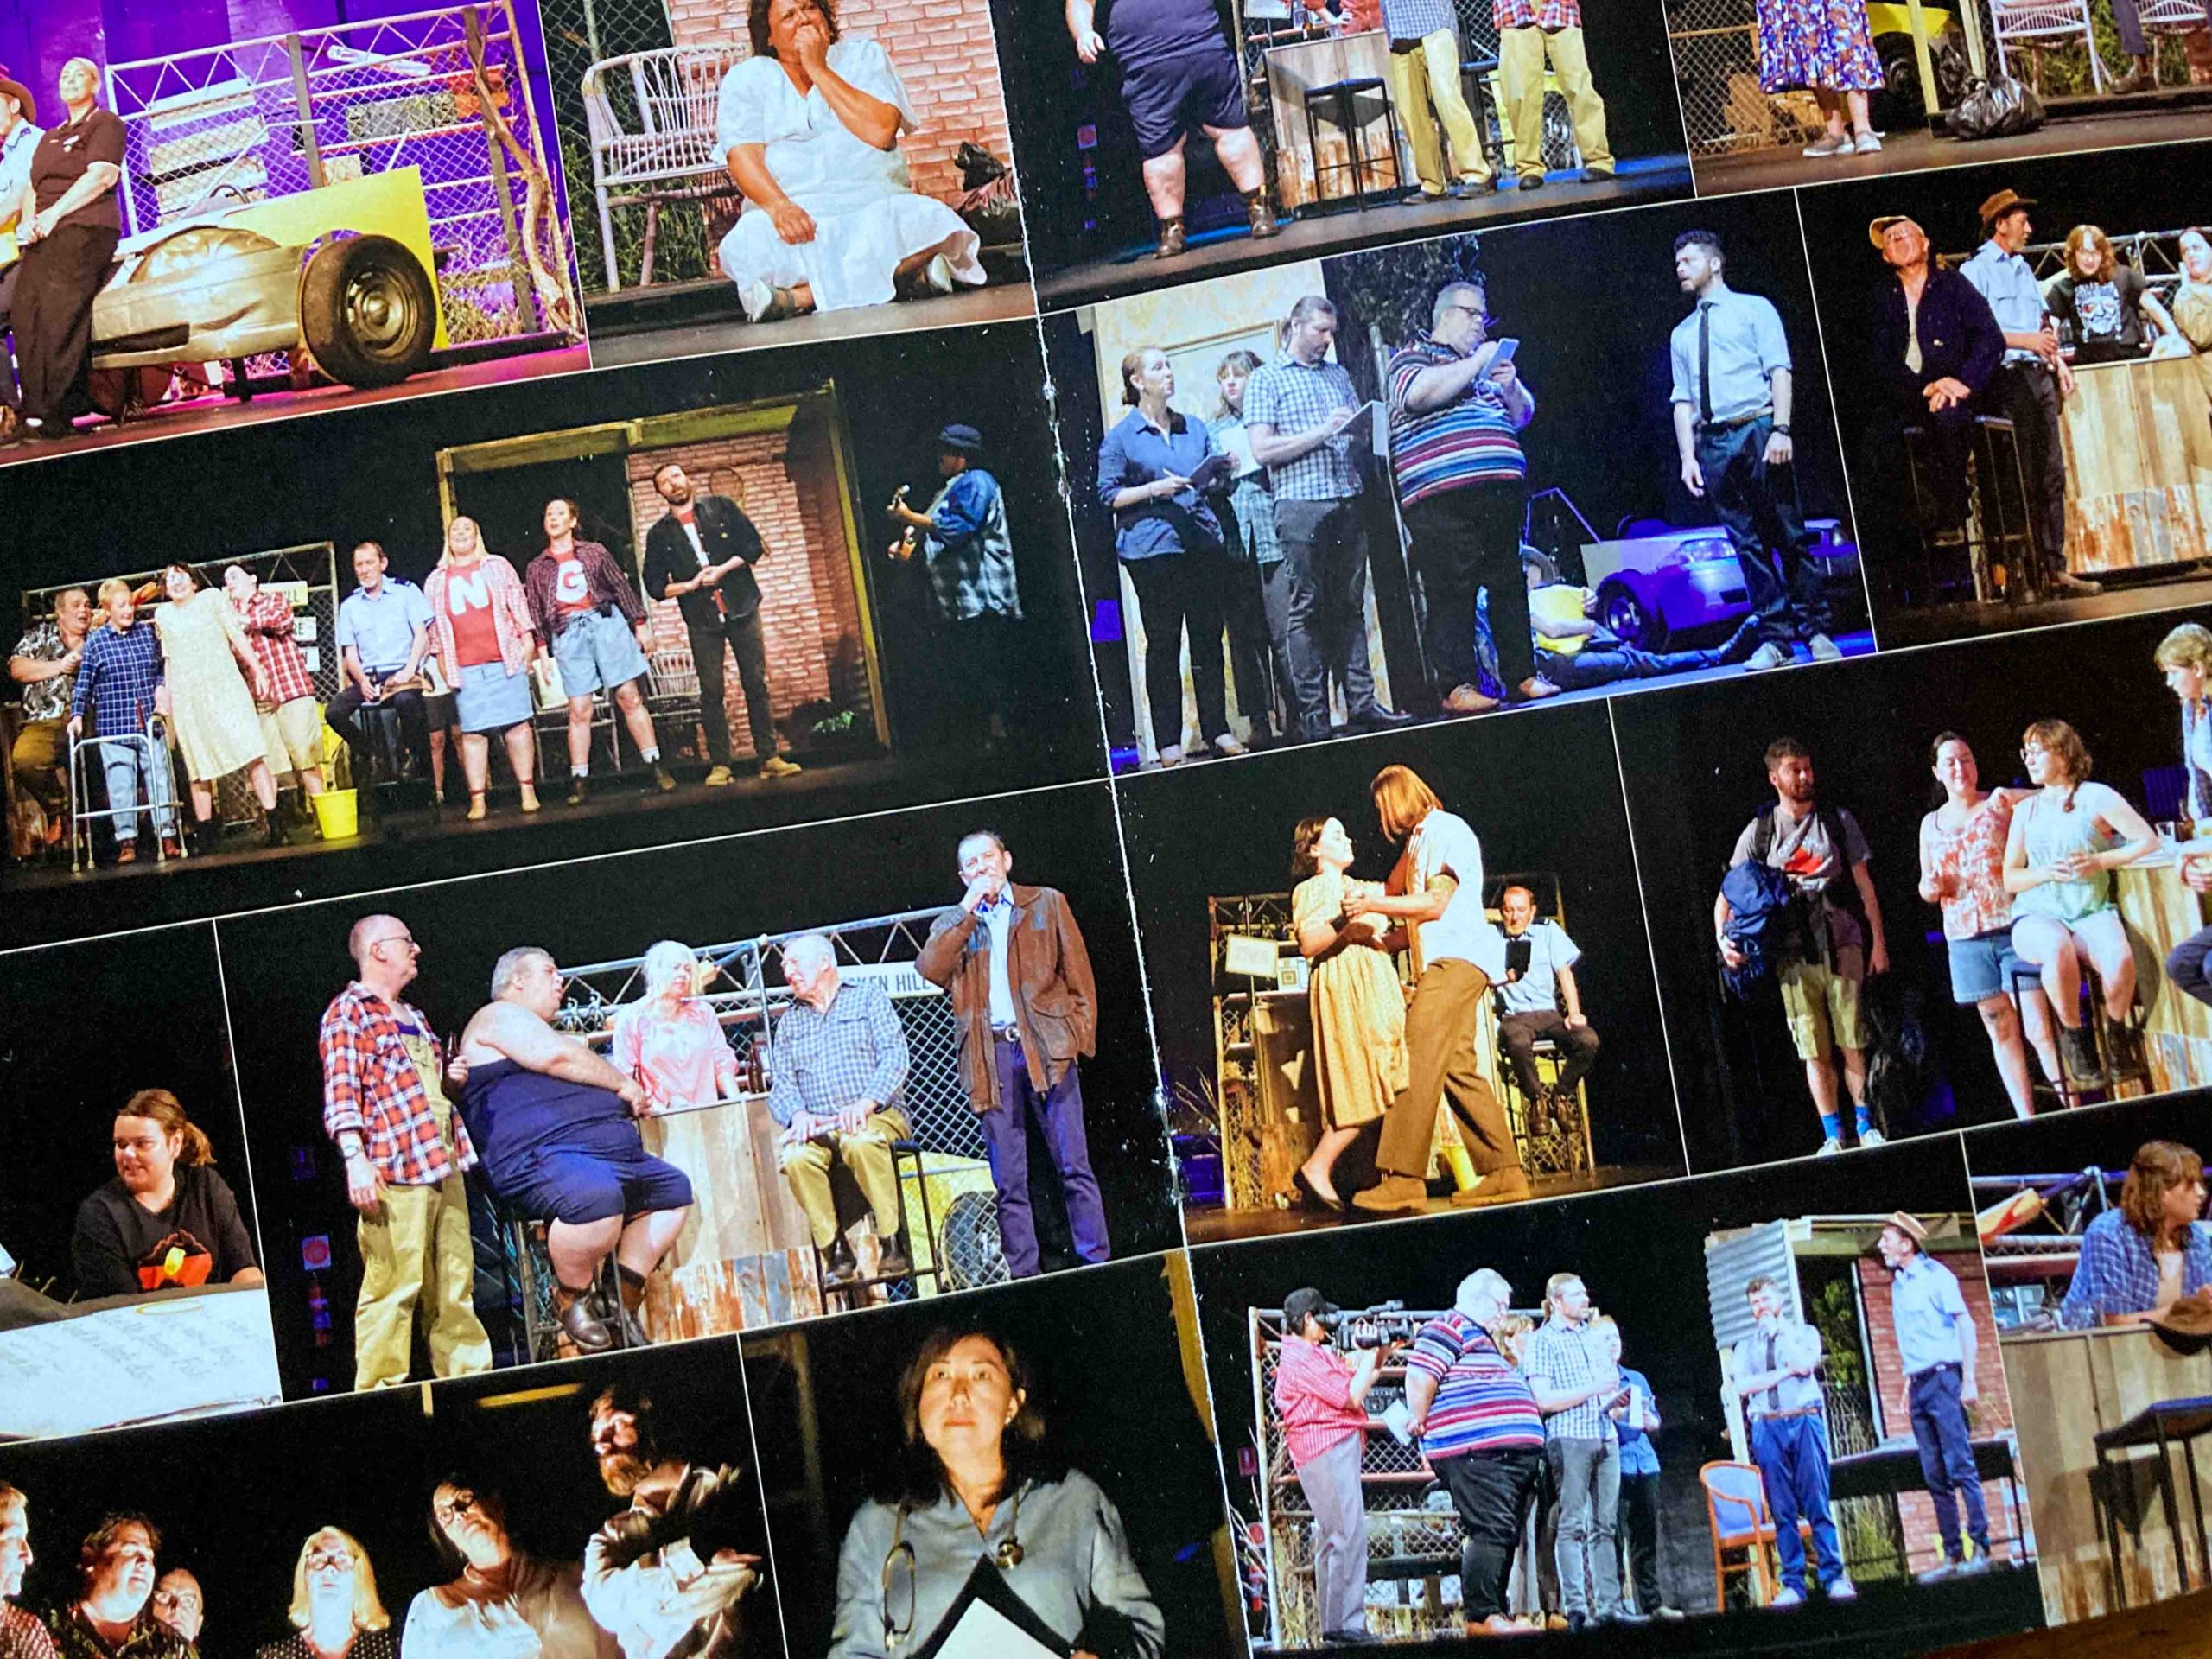 A series of photos of a stage show depicting people doing various actions, inckuding talking at a bar, dancing and holding a book